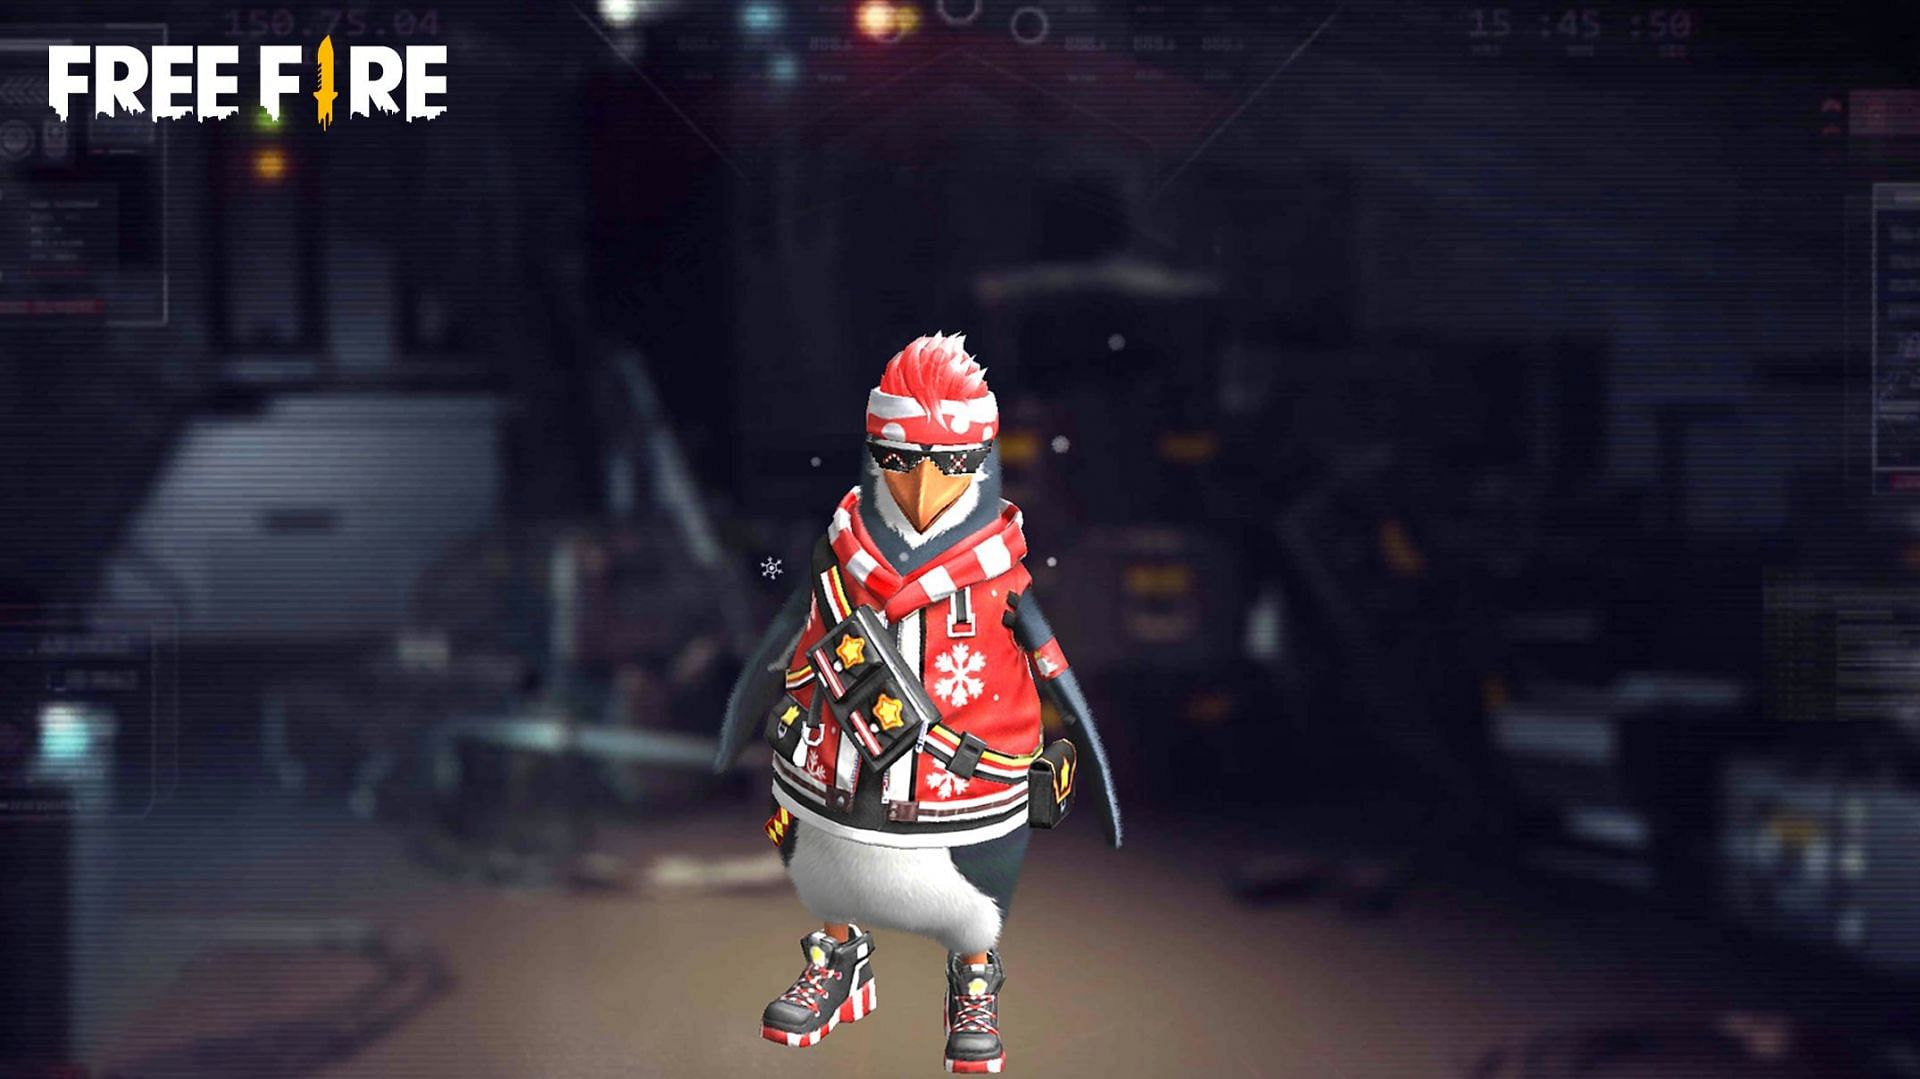 This skin can be attained at no cost (Image via Free Fire)